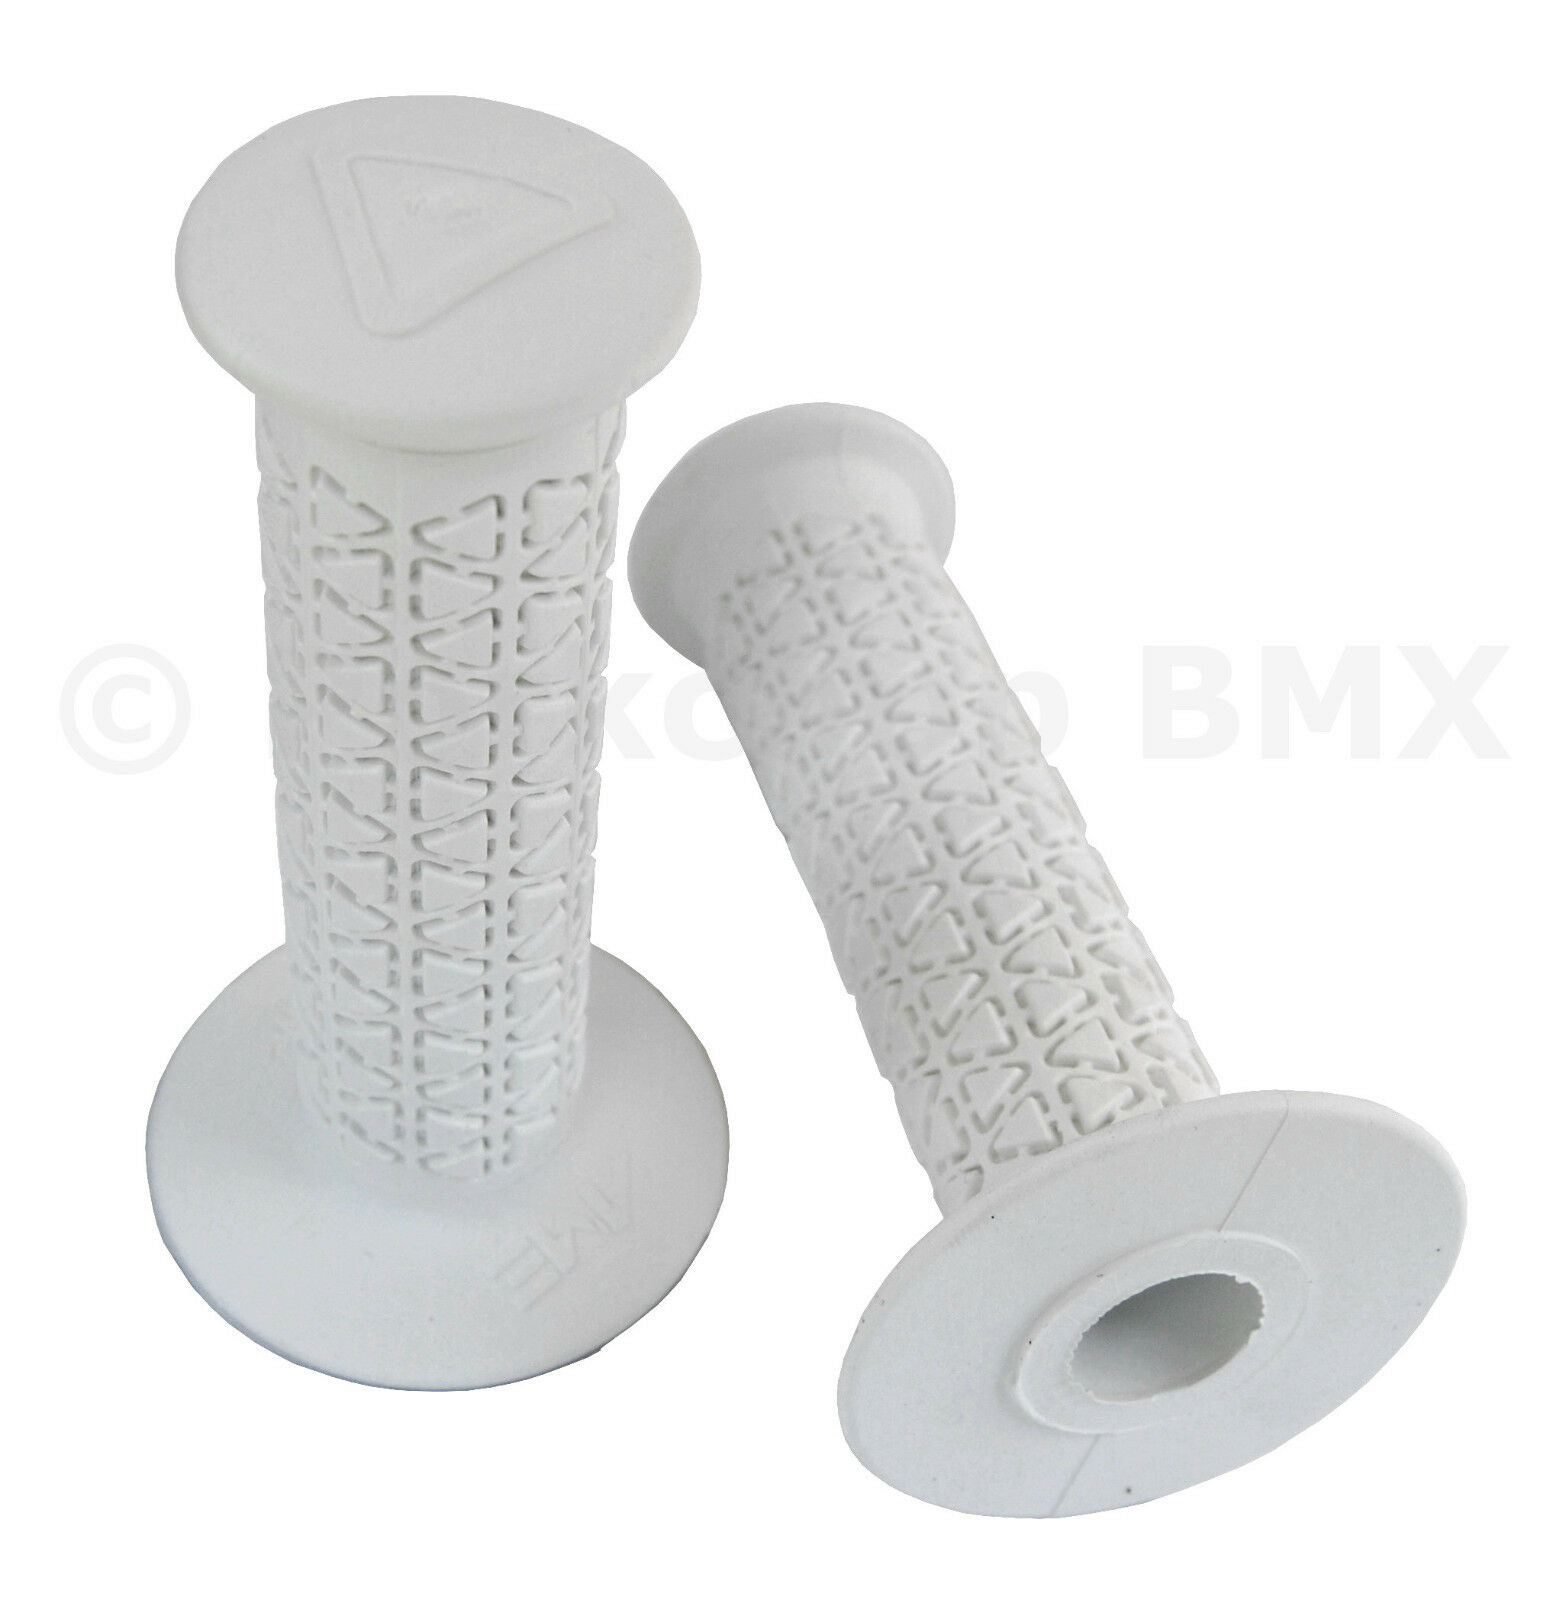 Ame Old School Bmx Rounds Bicycle Grips - White *made In Usa*